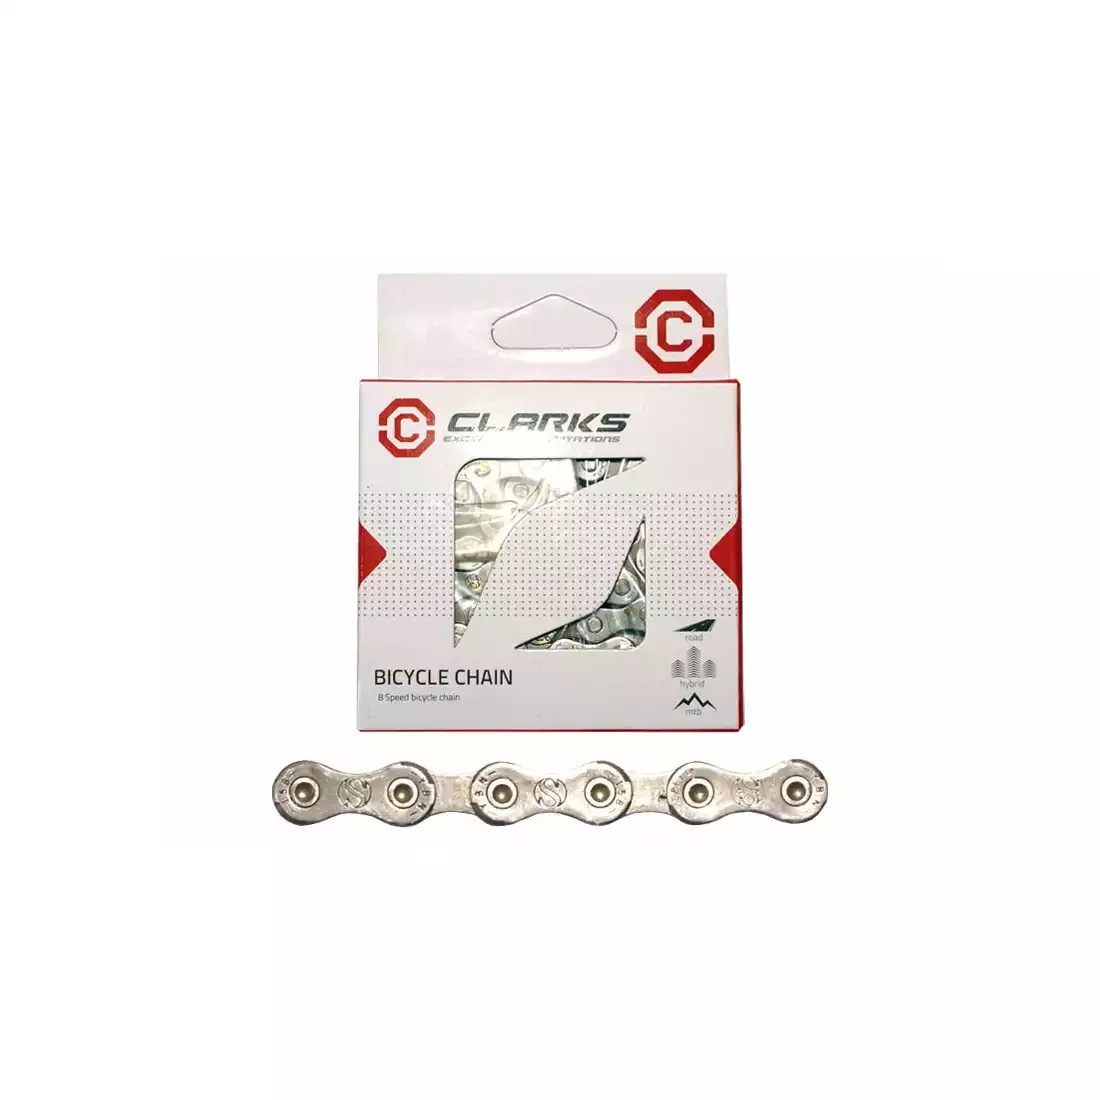 CLARKS C8 Bicycle chain 8-speed, 116 links, Road / MTB, Silver